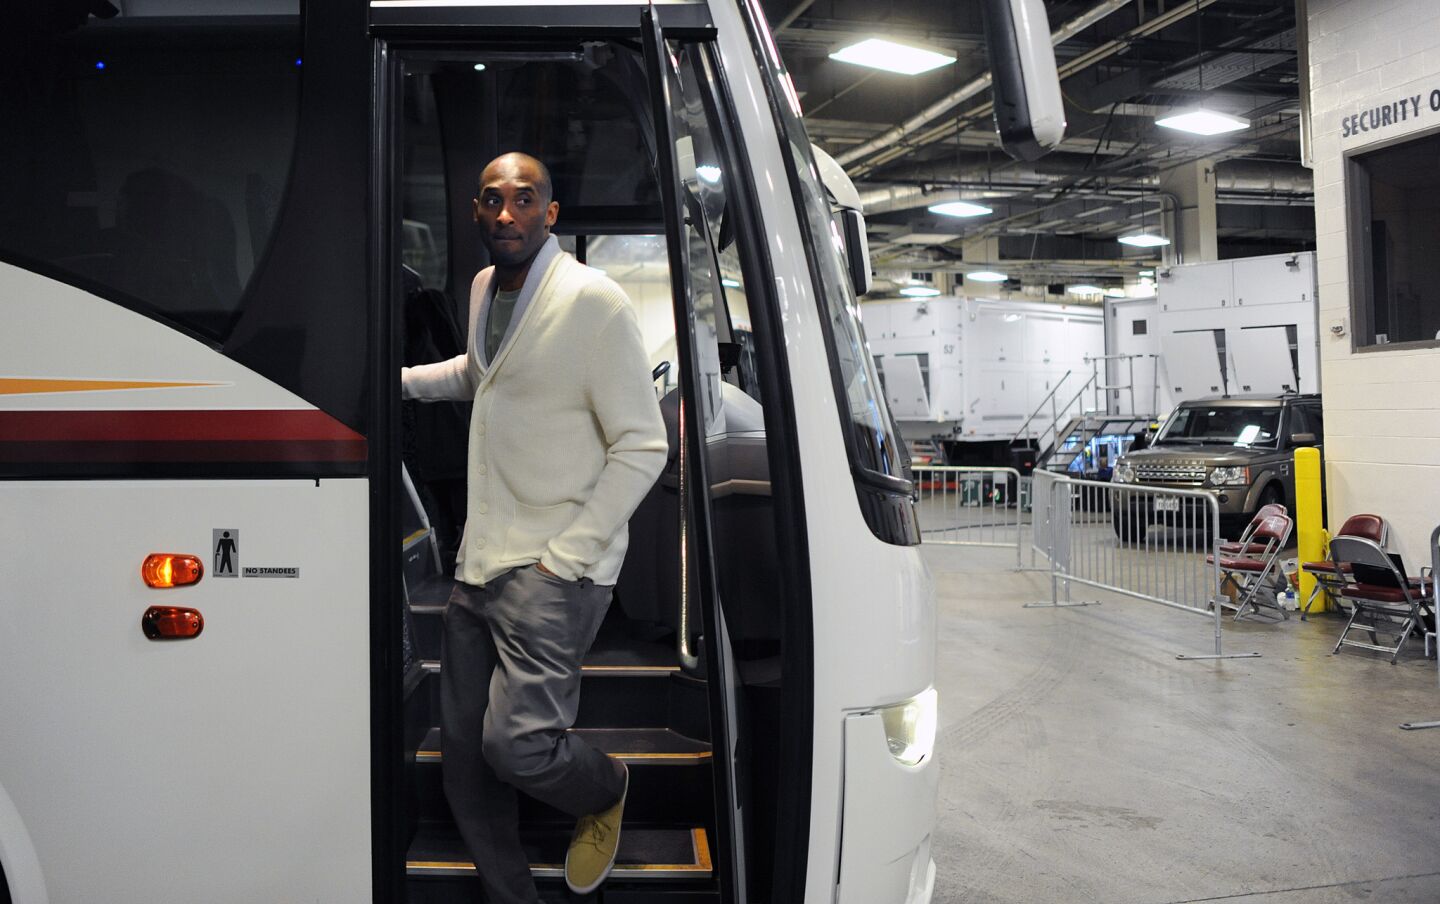 Laker Kobe Bryant arrives on the team bus before a game against the Rockets in Houston.